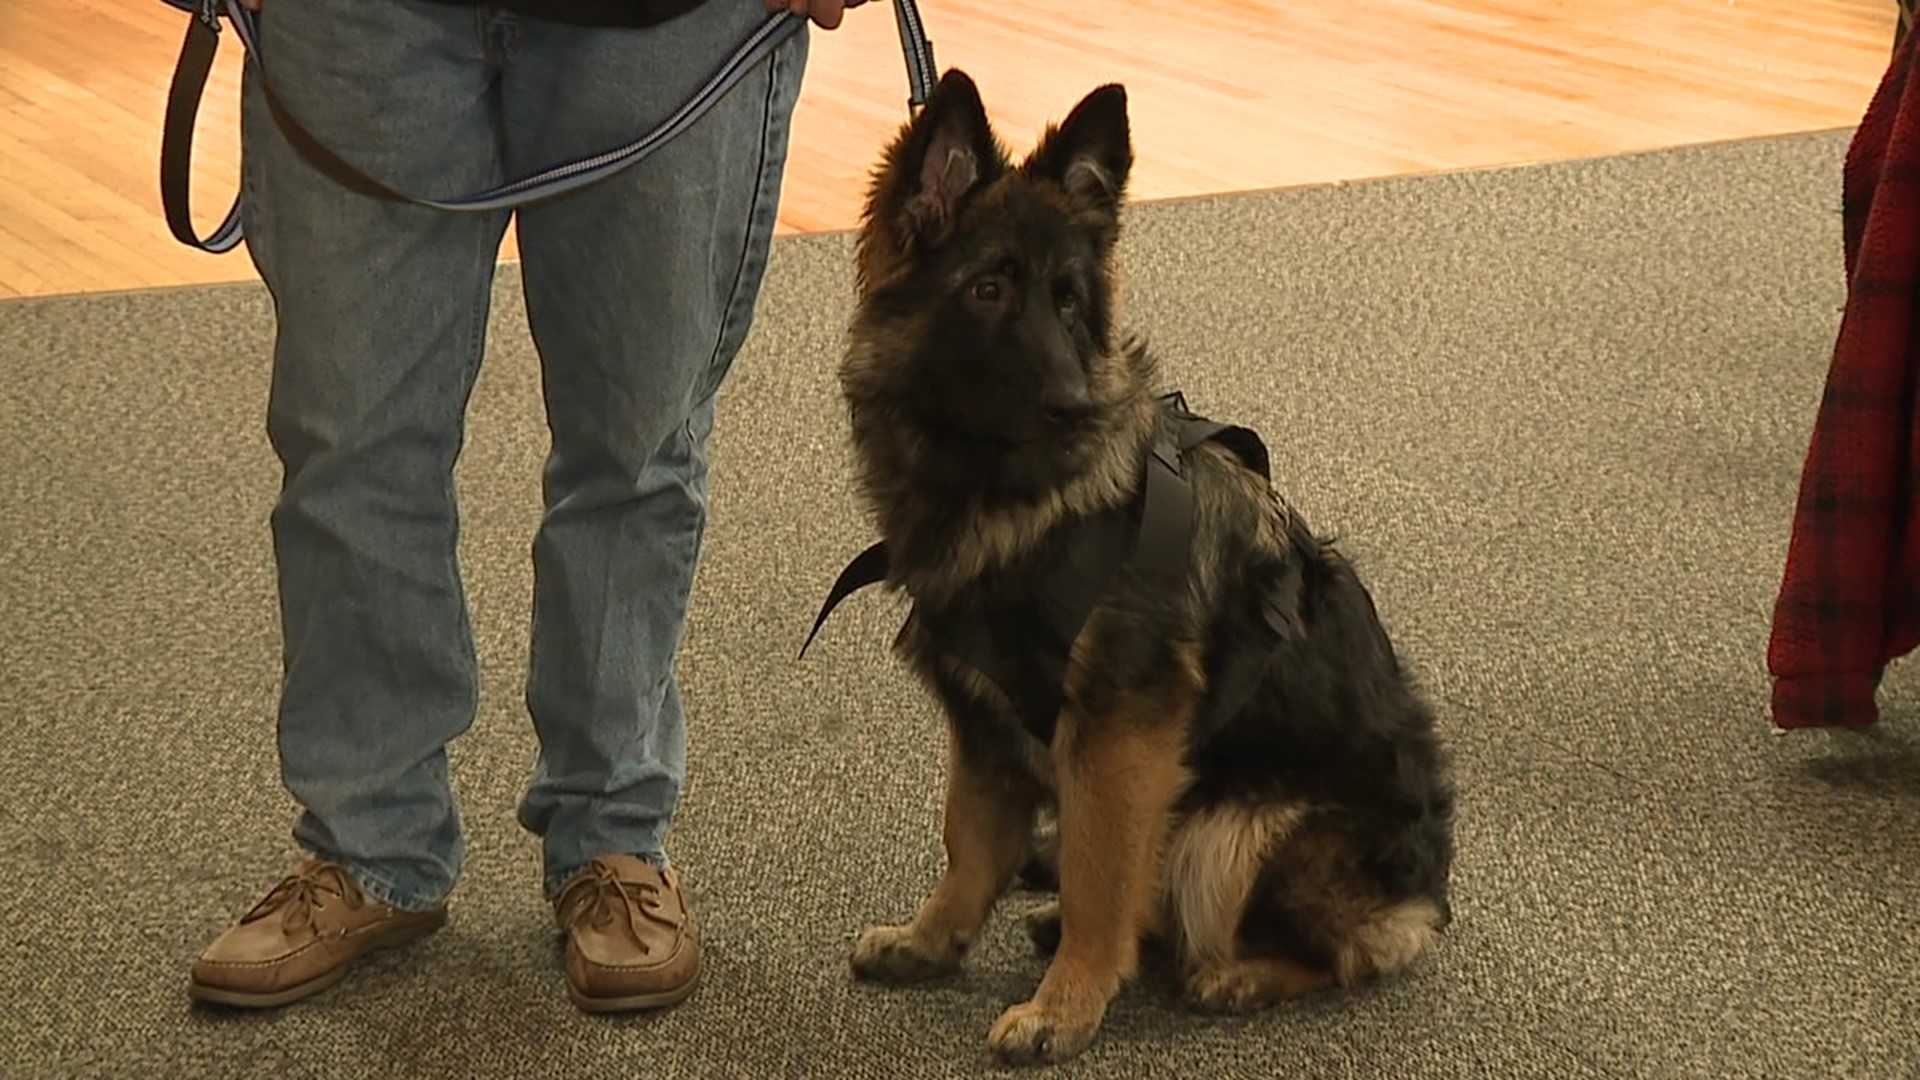 The fundraiser supported the Gouldsboro Police Department's new K9 officer Porsche.